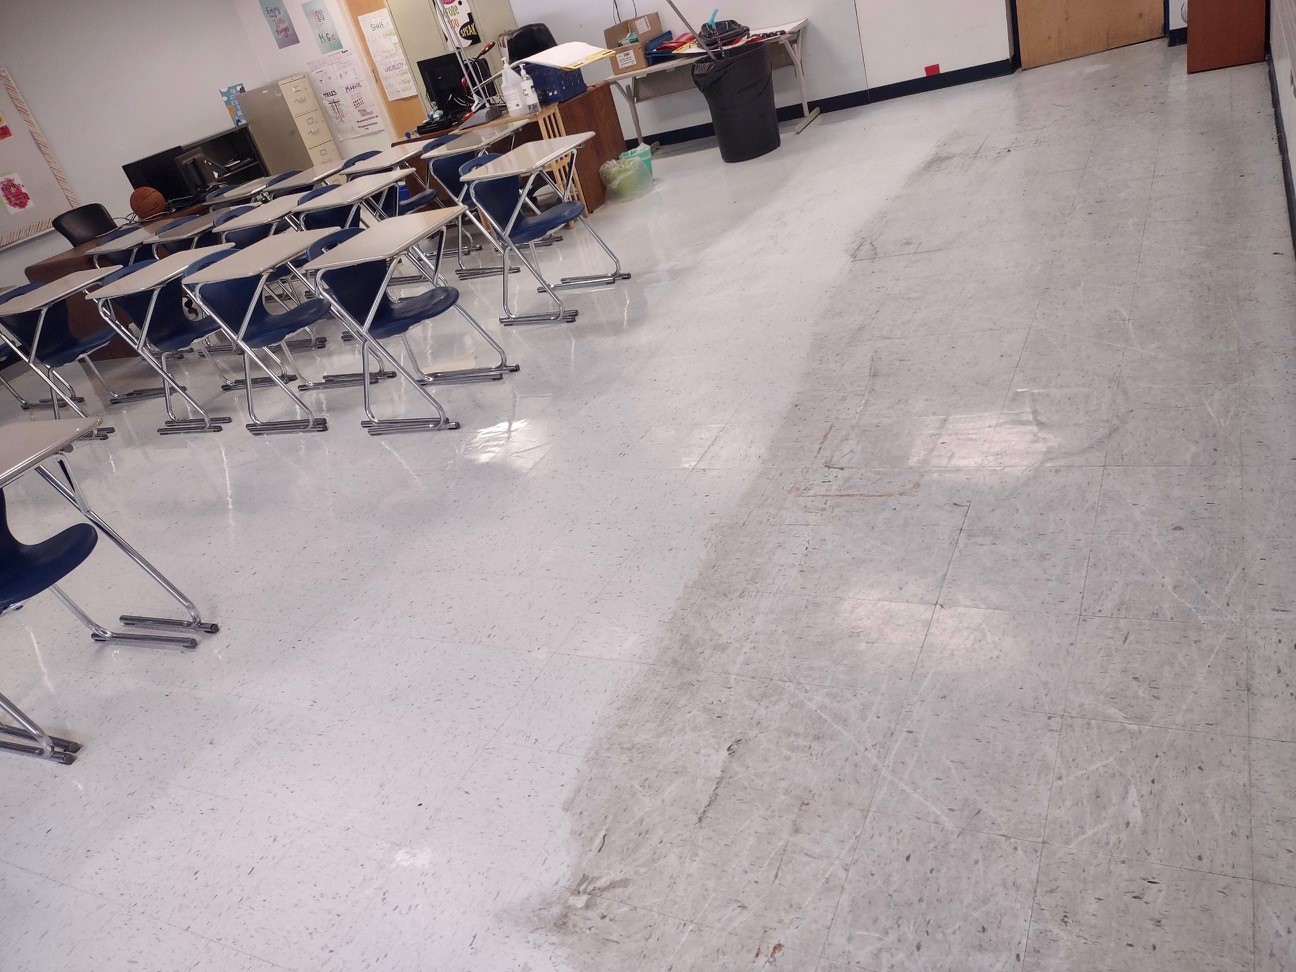 Dirty and clean classrooms